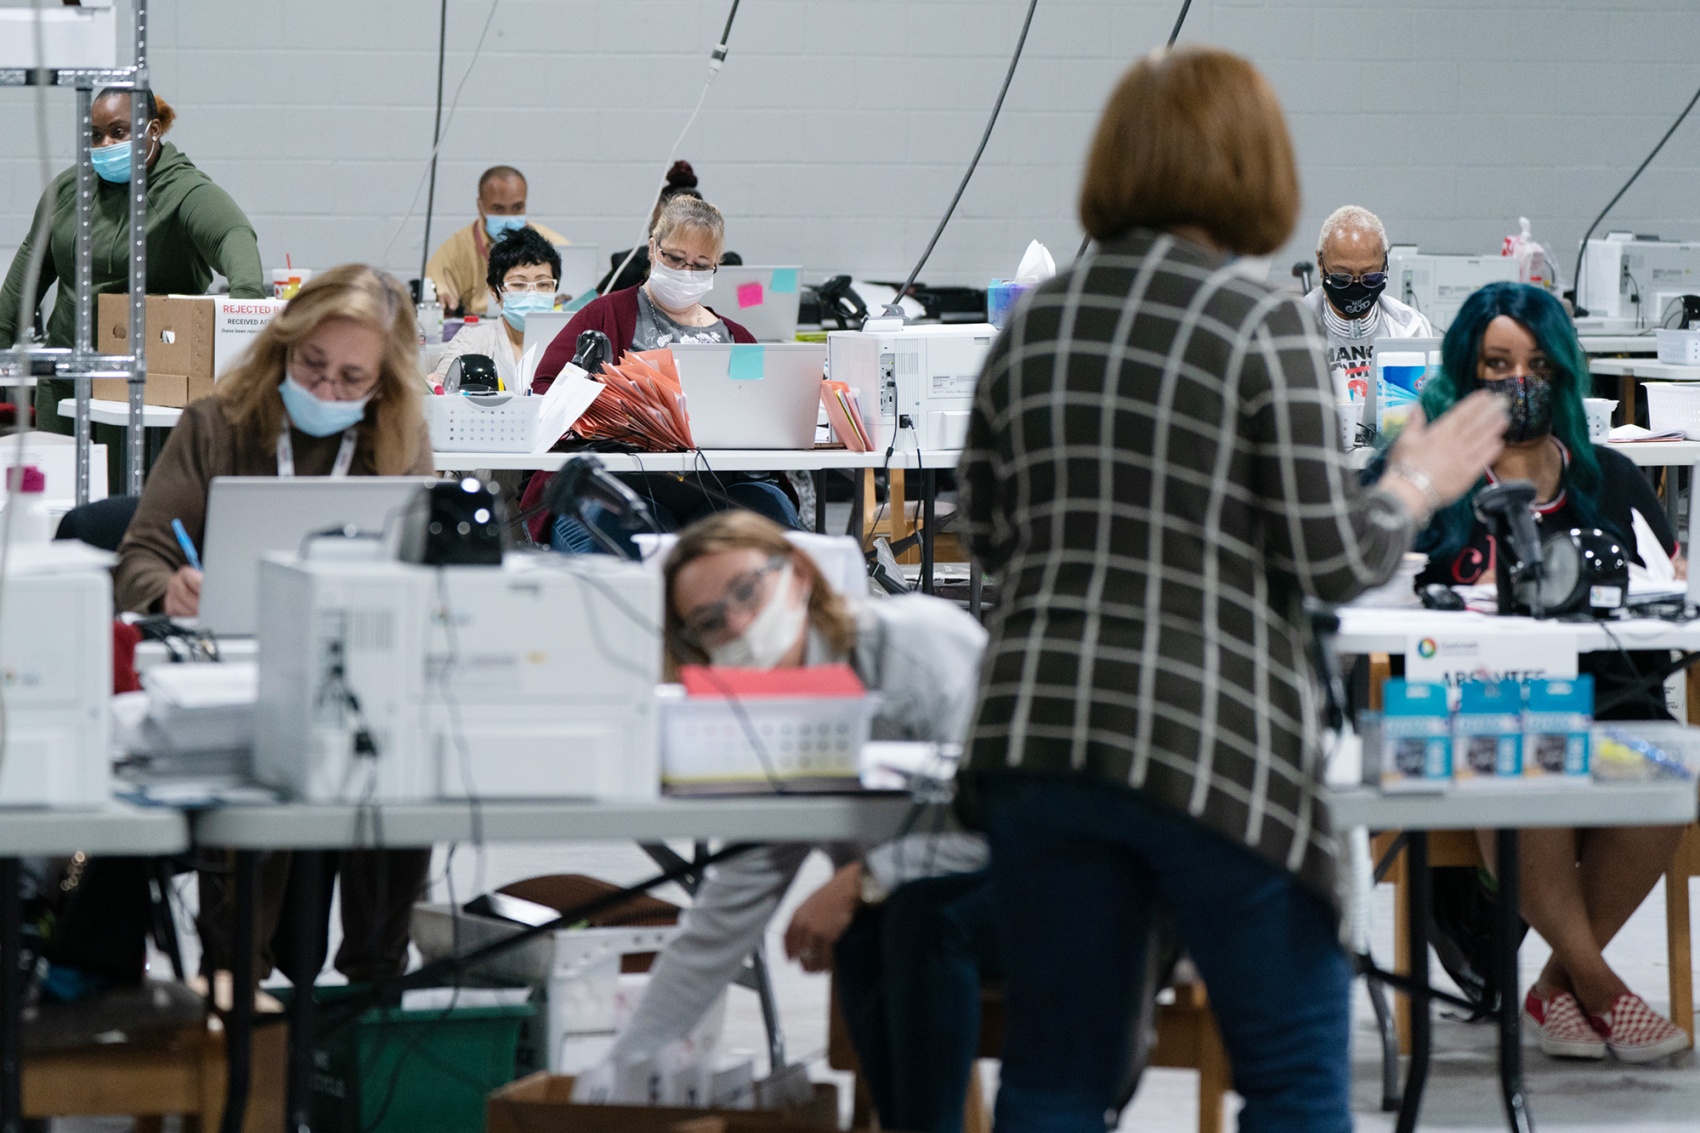 Election officials check ballots in Lawrenceville, Georgia, on Saturday.